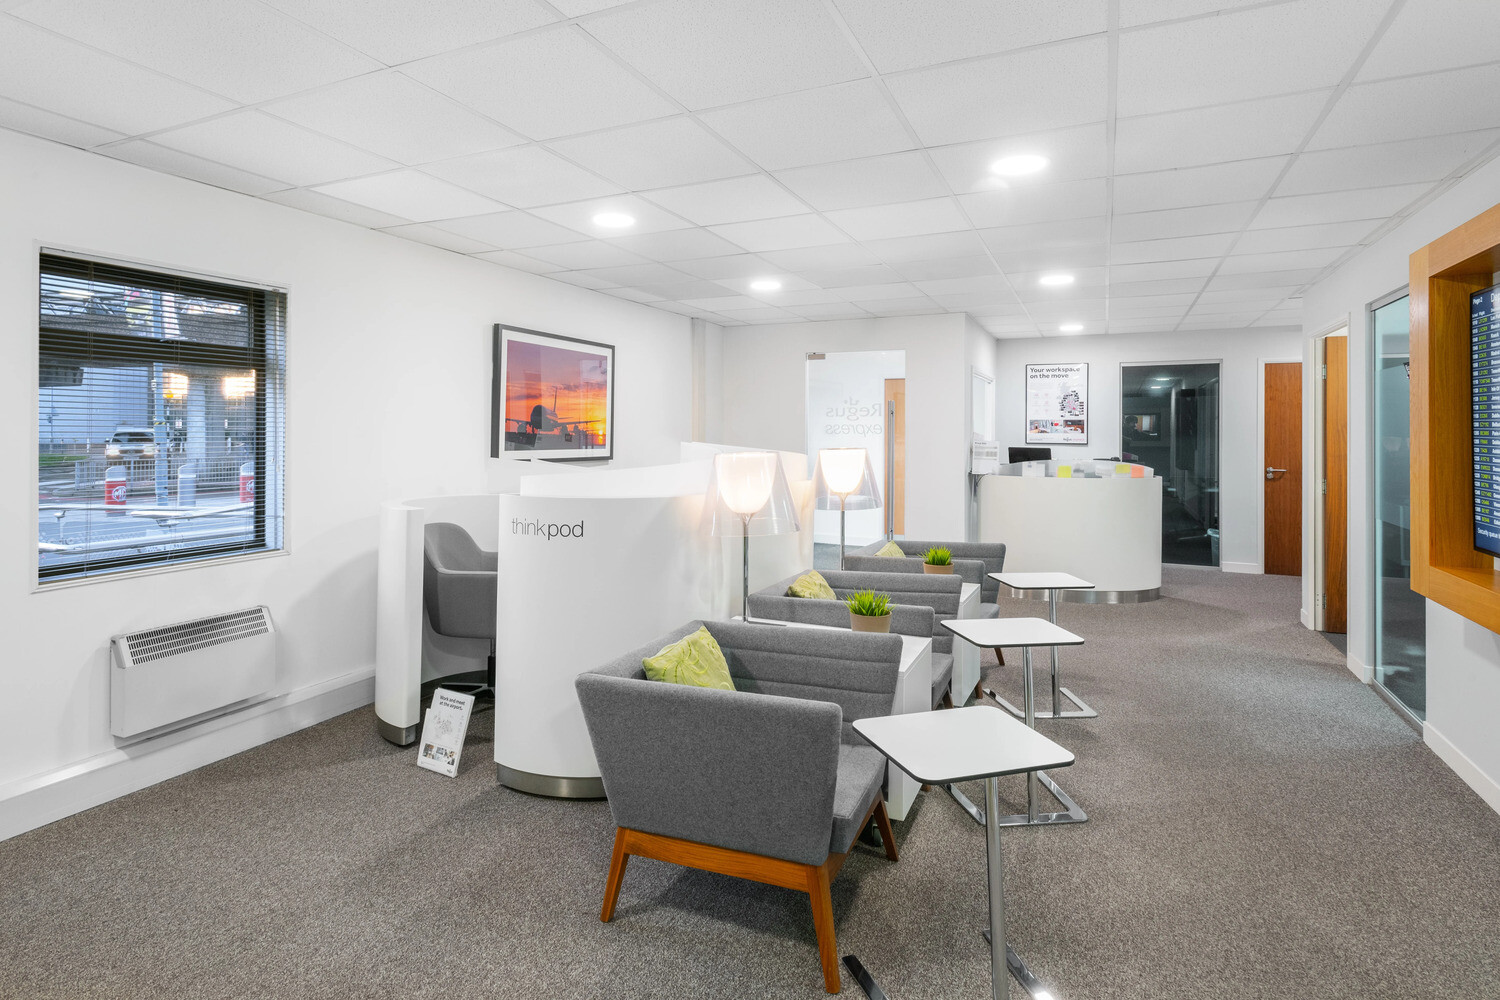 Offices to let at Birmingham Airport